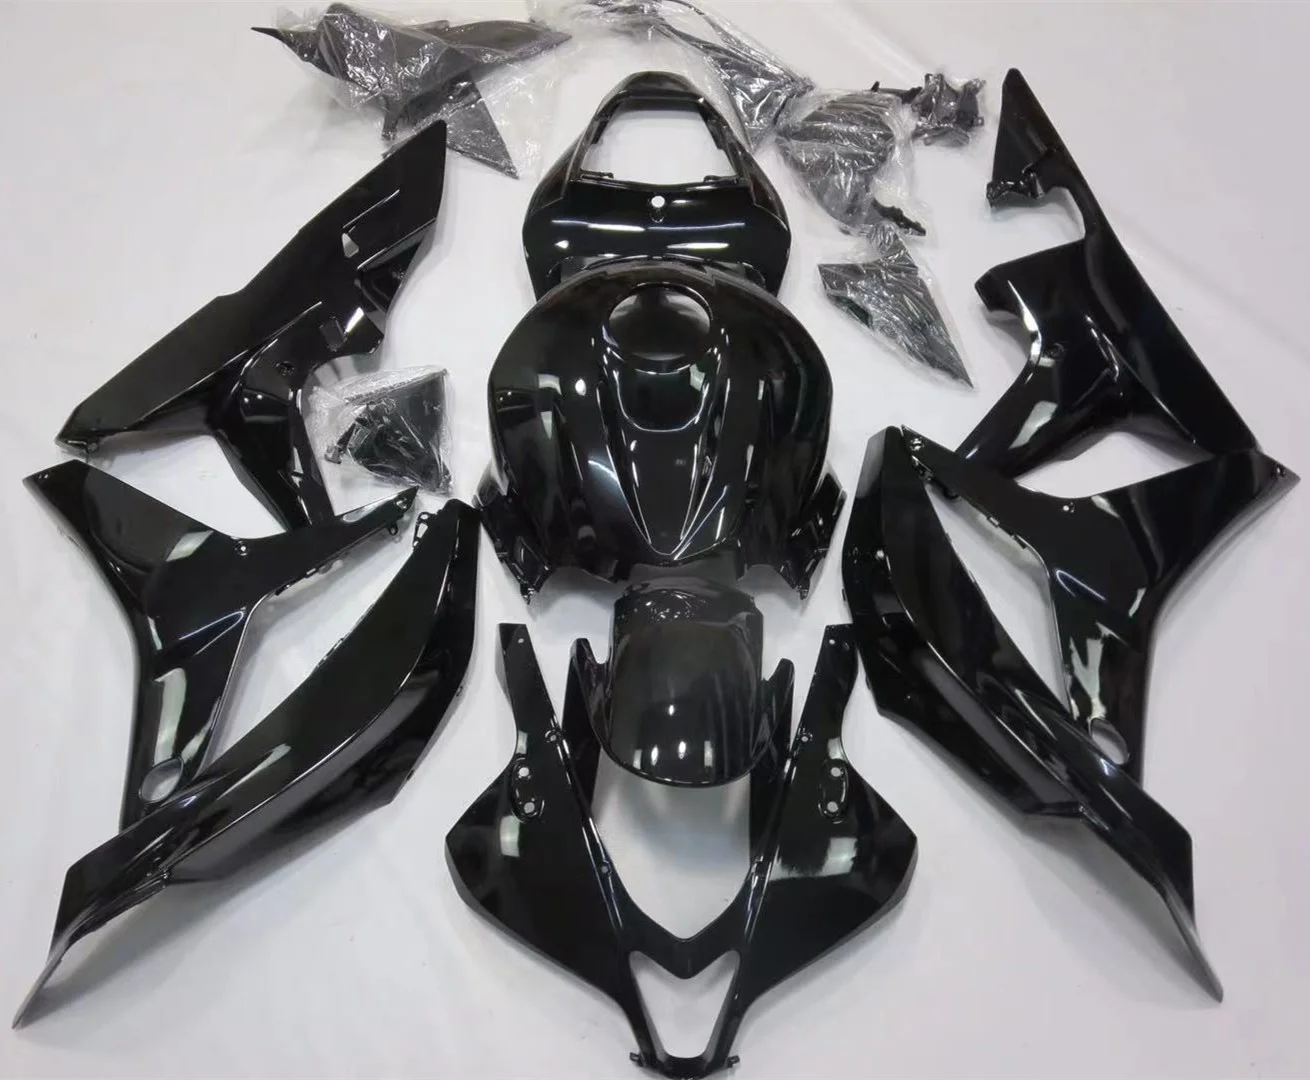 

2022 WHSC Motorcycle Parts For HONDA CBR600 2007-2008 Gloss Black, Pictures shown